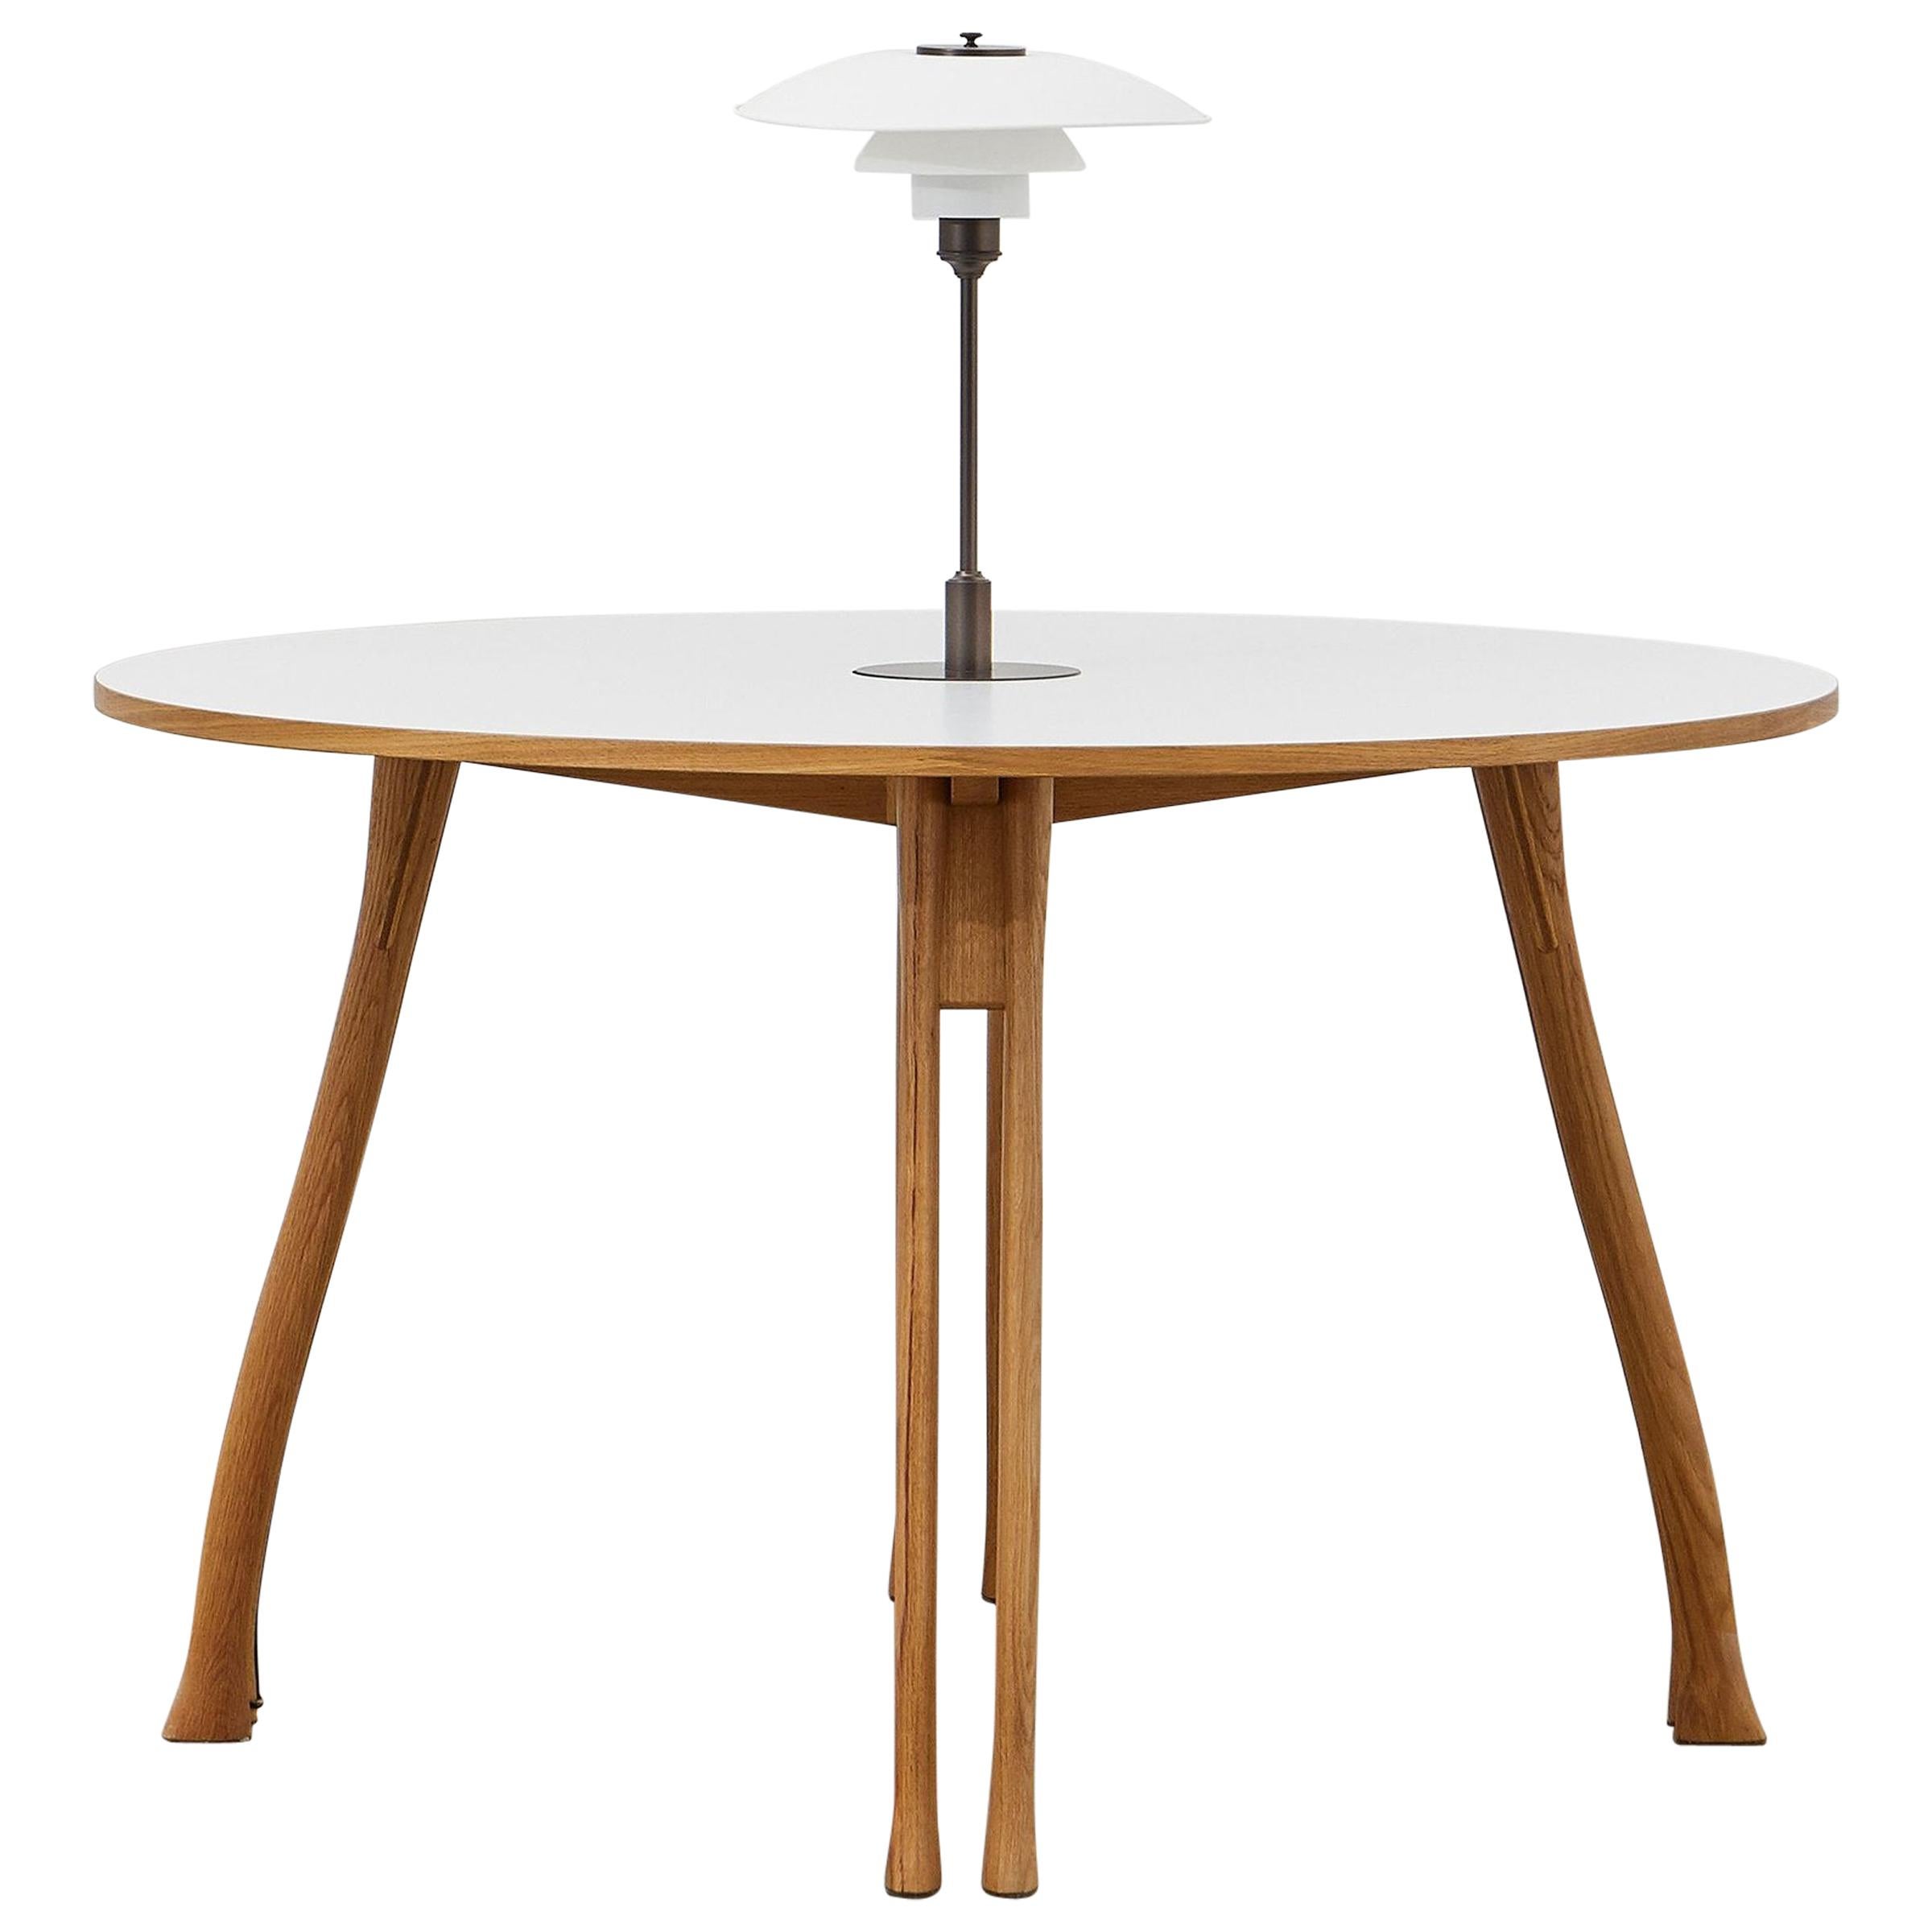 PH Axe Table, natural oak legs, laminated plate, white PH 3 ½ - 2 ½ lamp For Sale